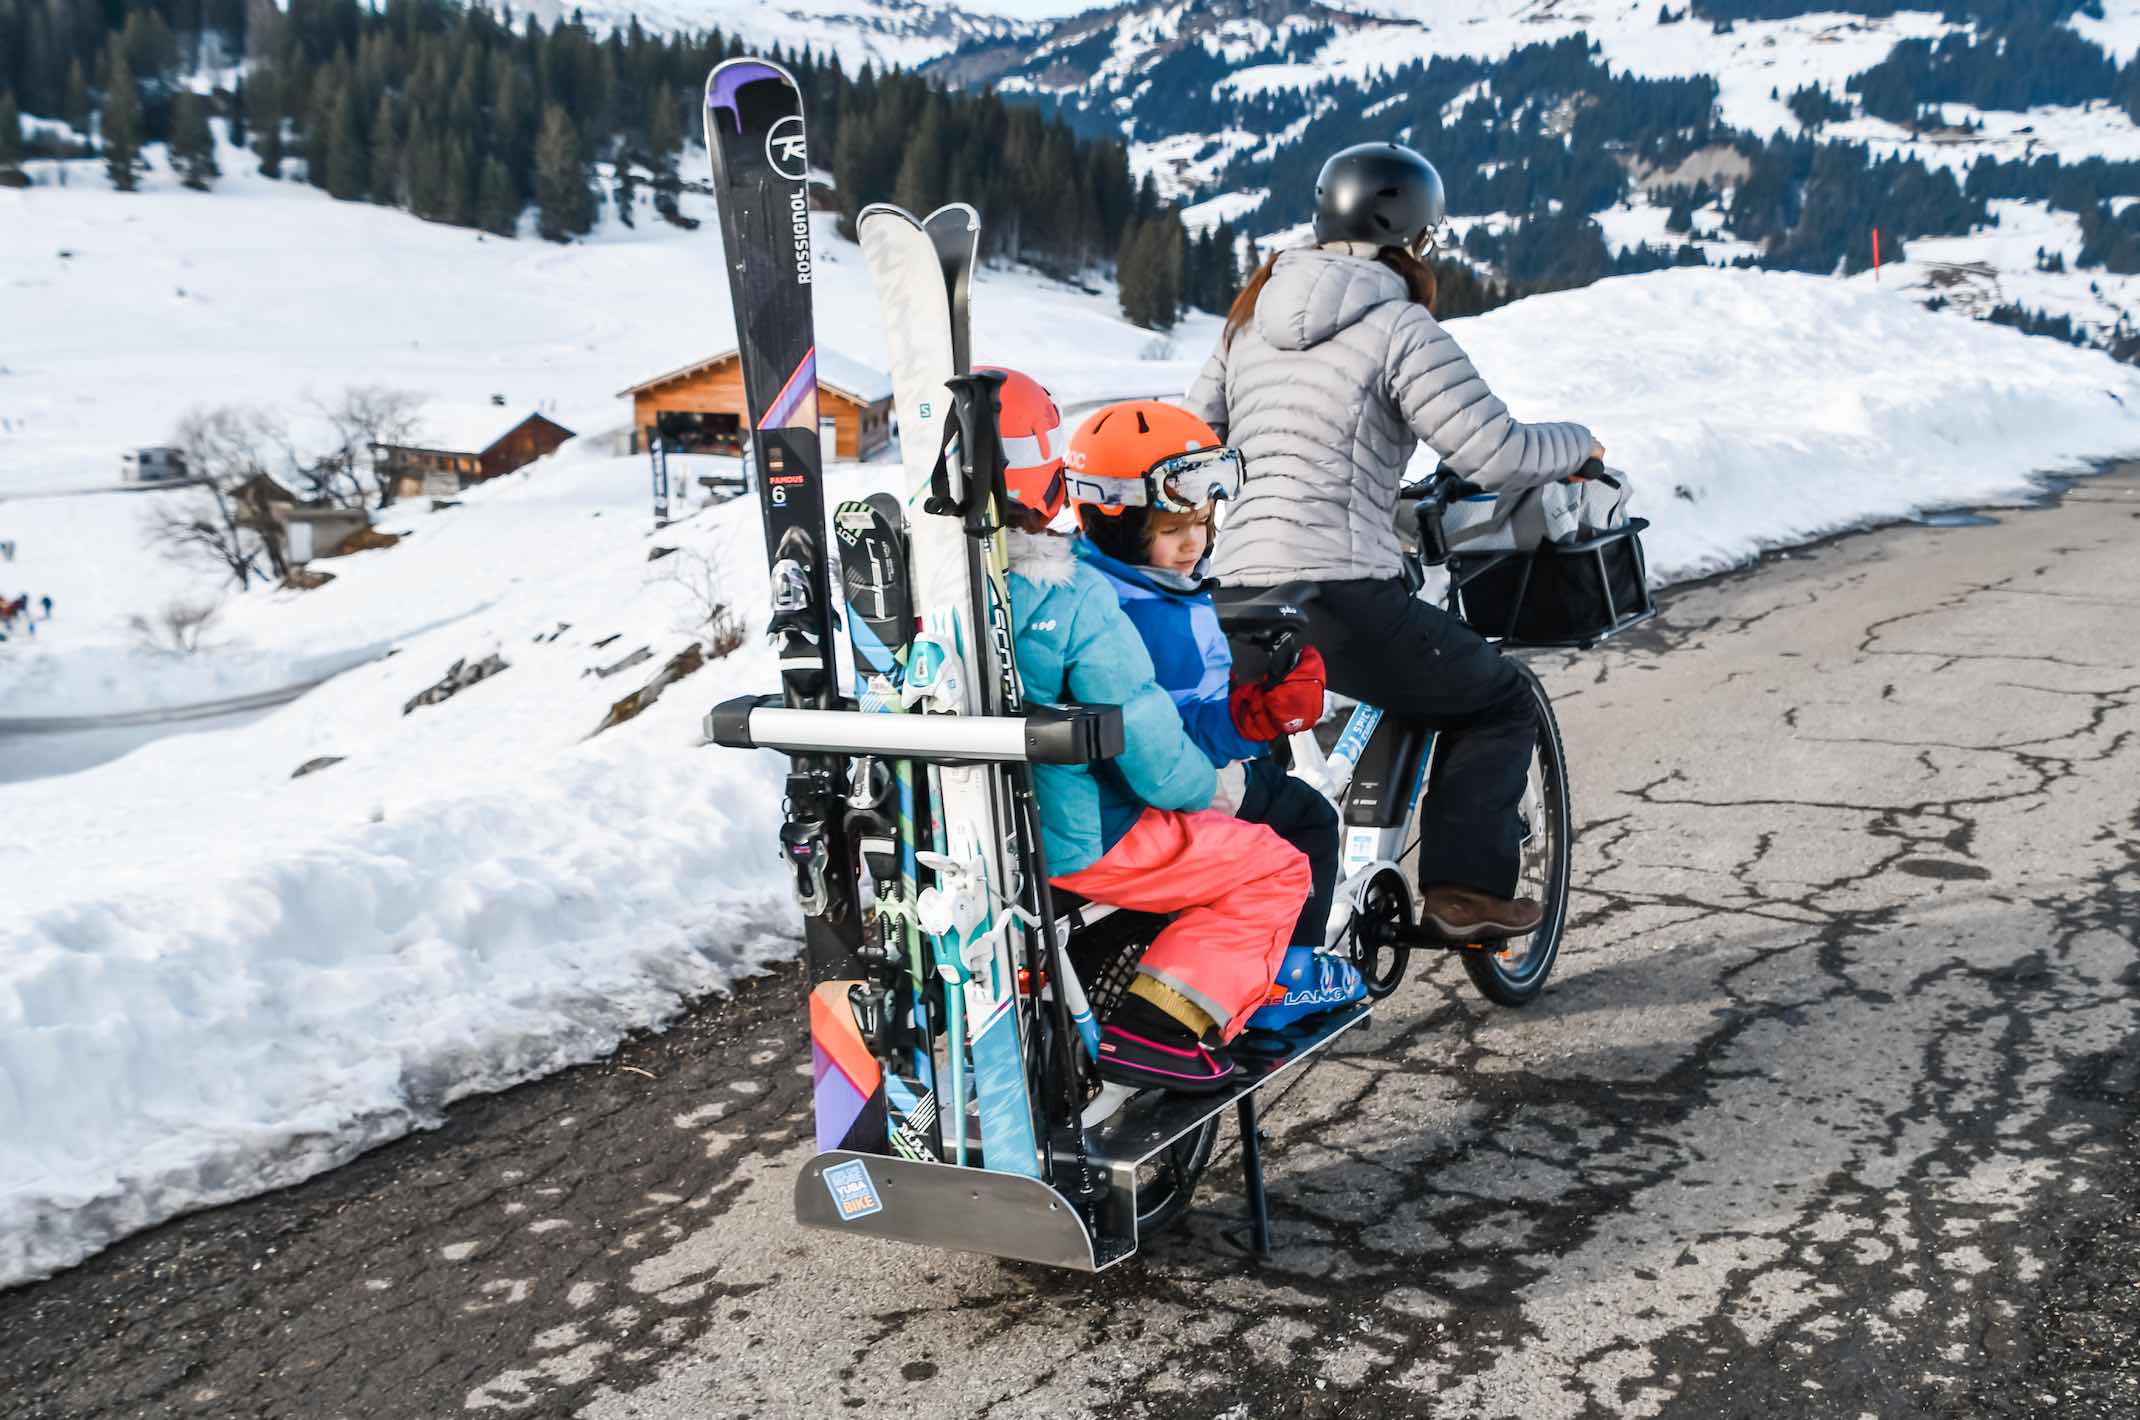 Photo of Yuba bike loaded with two children, a rider and skis for the whole family. Rear view.